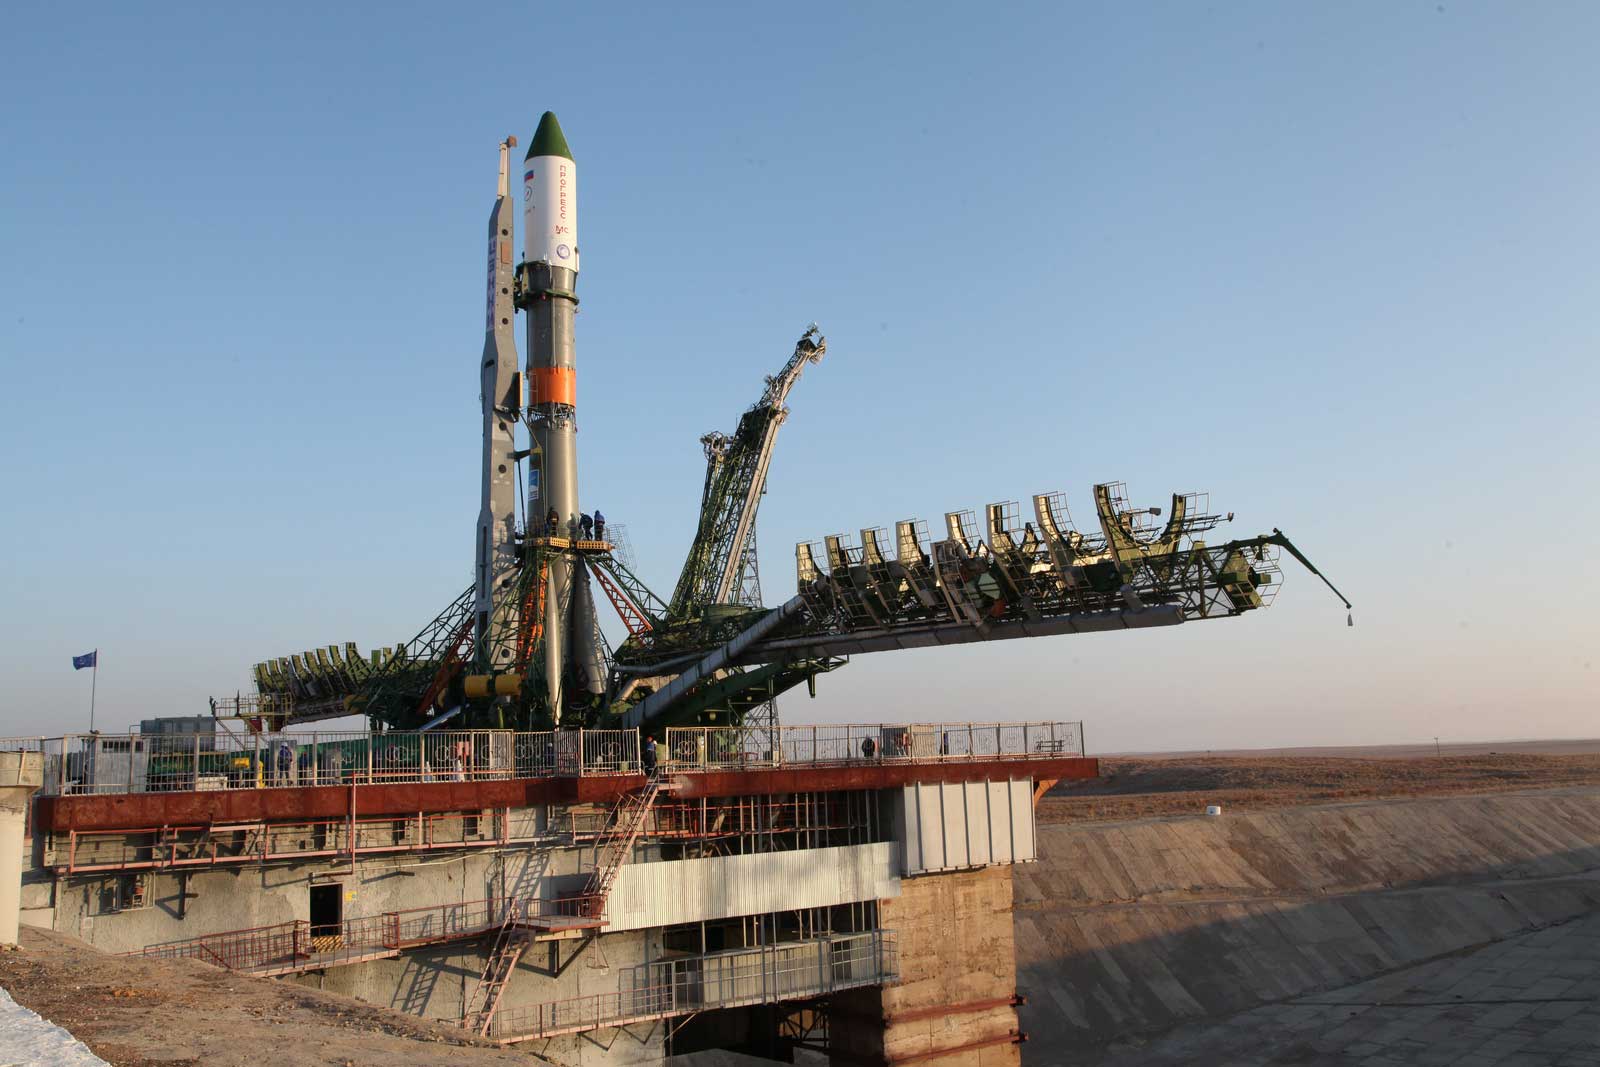 Progress MS-04 was launched atop the Soyuz-U carrier rocket from the Baikonur space center in Kazakhstan on Dec. 1. Later, Roscosmos reported that the spacecraft was lost after an anomaly occurred during the third stage operation.